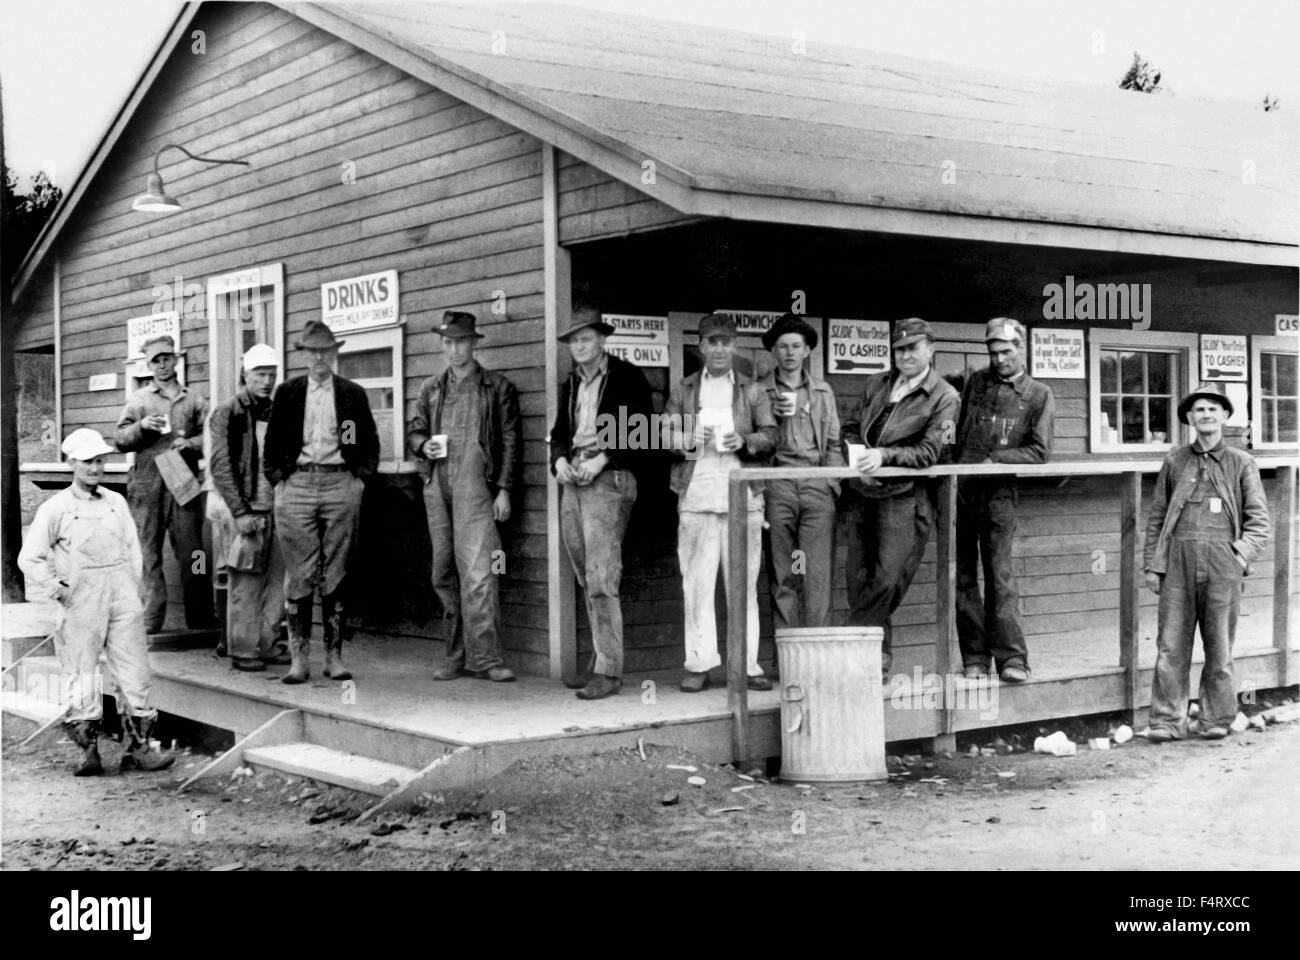 Workers on break at a store. 19th April 1944. Oak Ridge. The town of Oak Ridge was established by the Army Corps of Engineers as Stock Photo